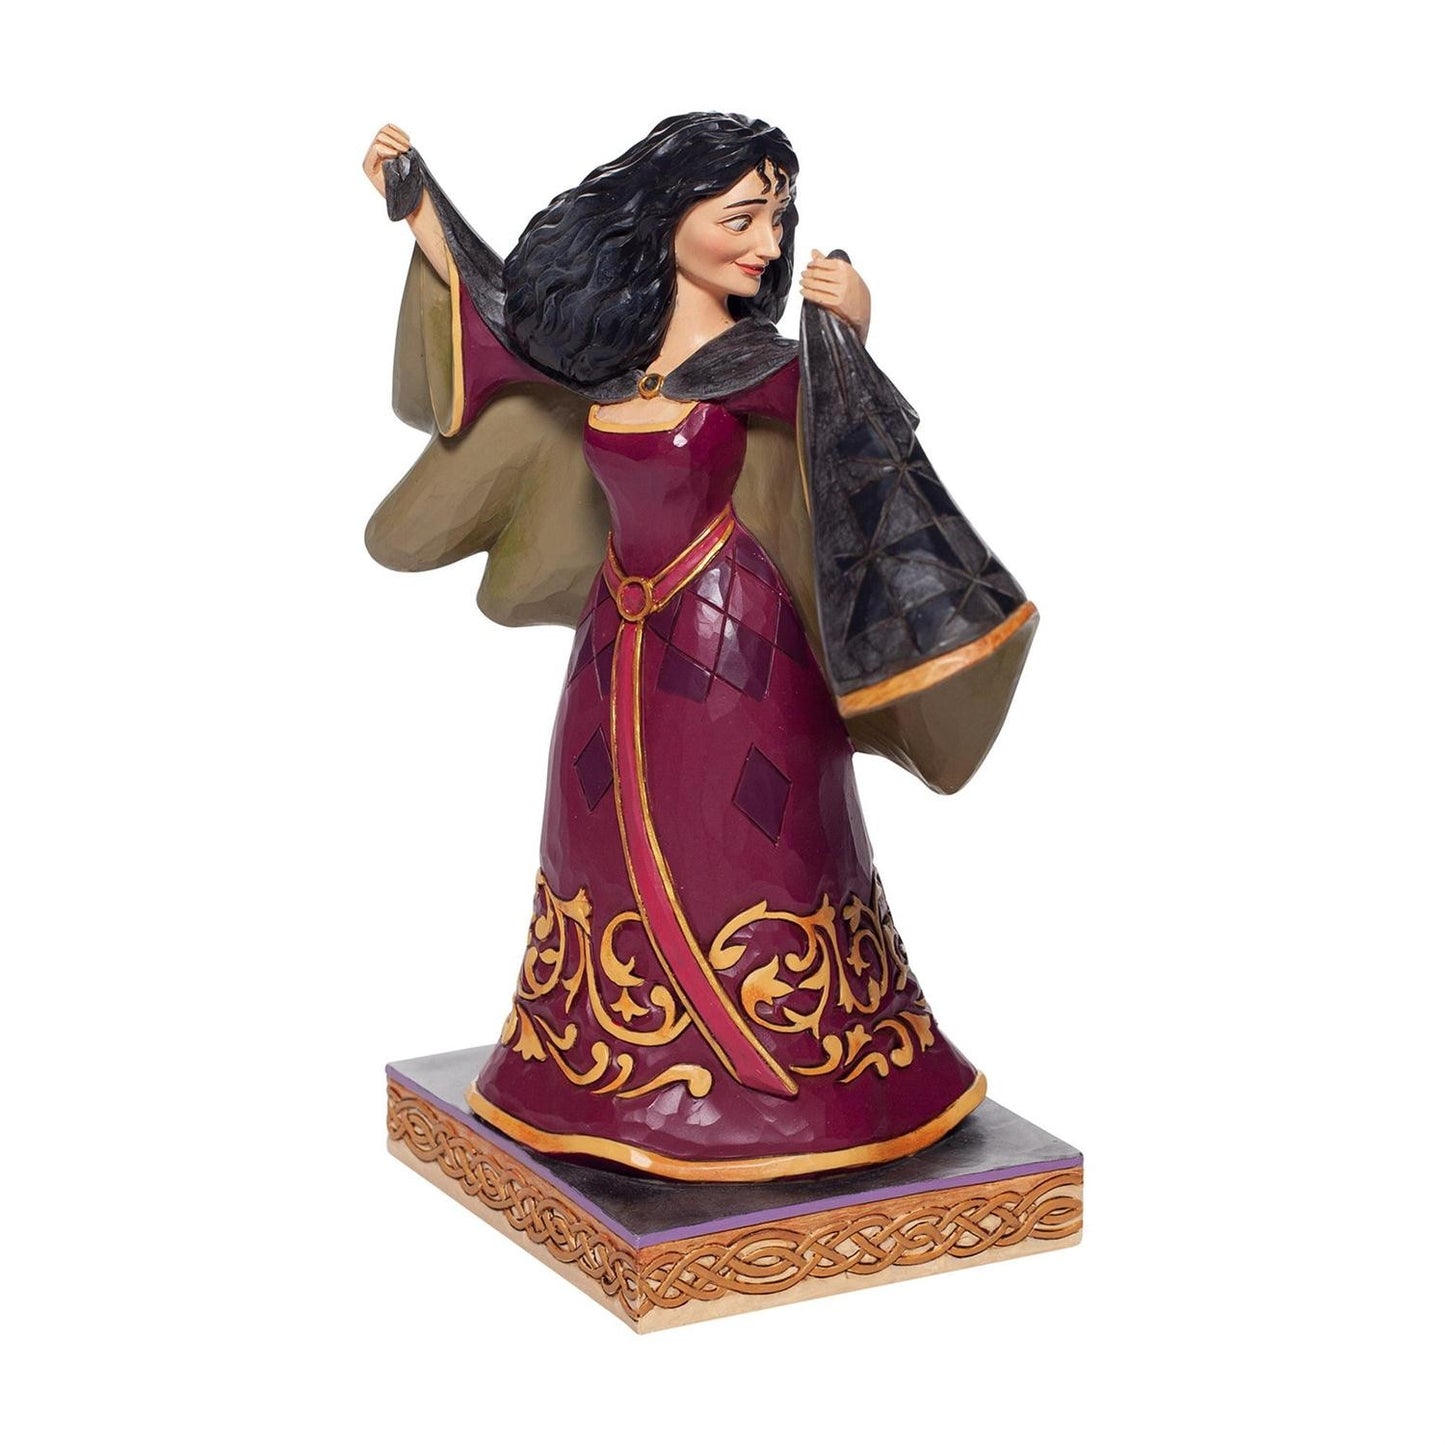 DISNEY TRADITIONS BY JIM SHORE MOTHER GOTHEL FIGURINE 20.5CM